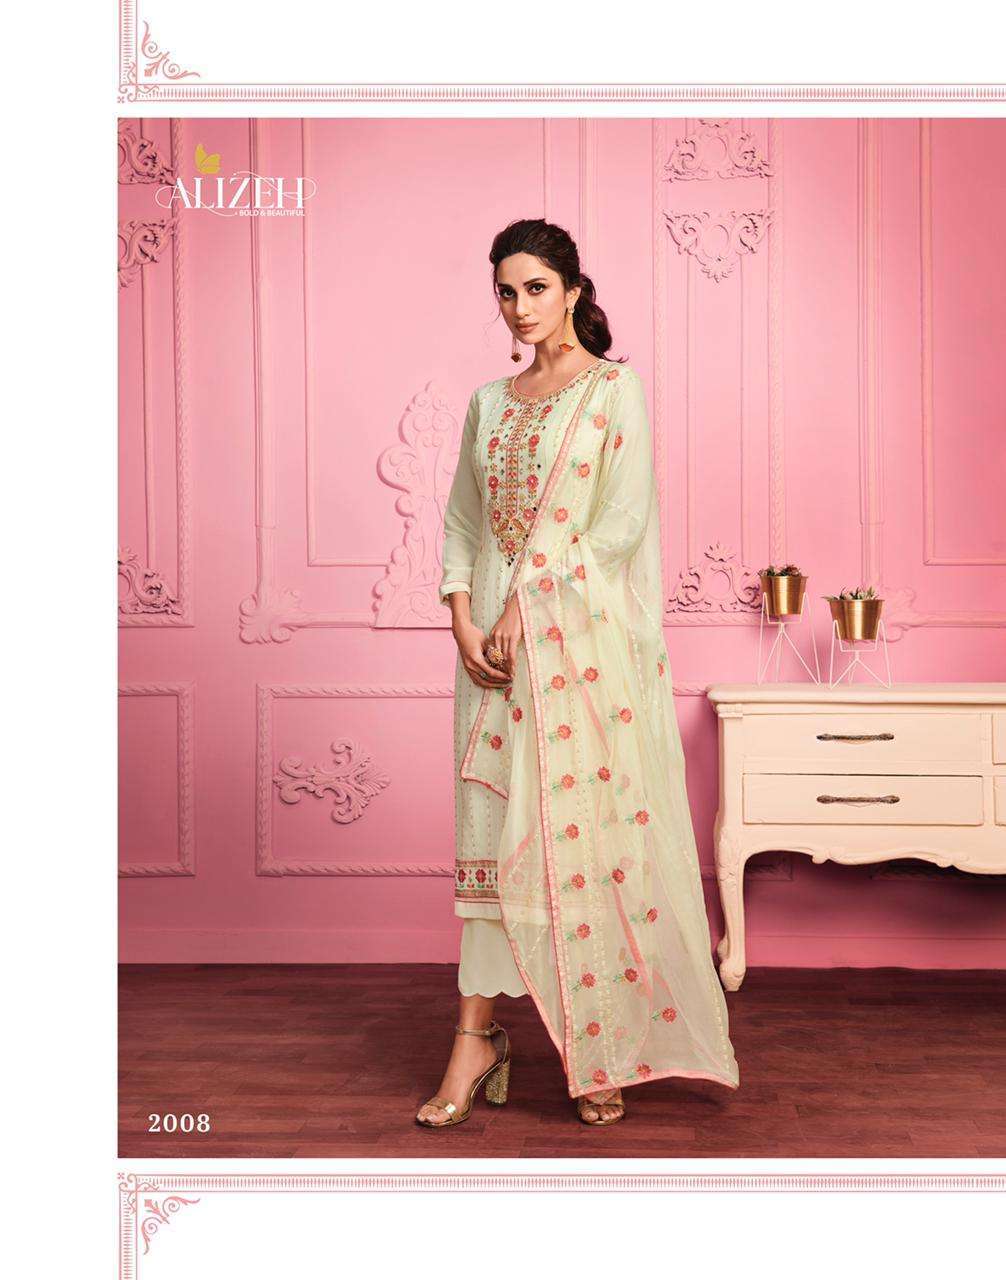 Alizeh Murad Vol 1 Georgette With Thread Embroidery Work Dre...